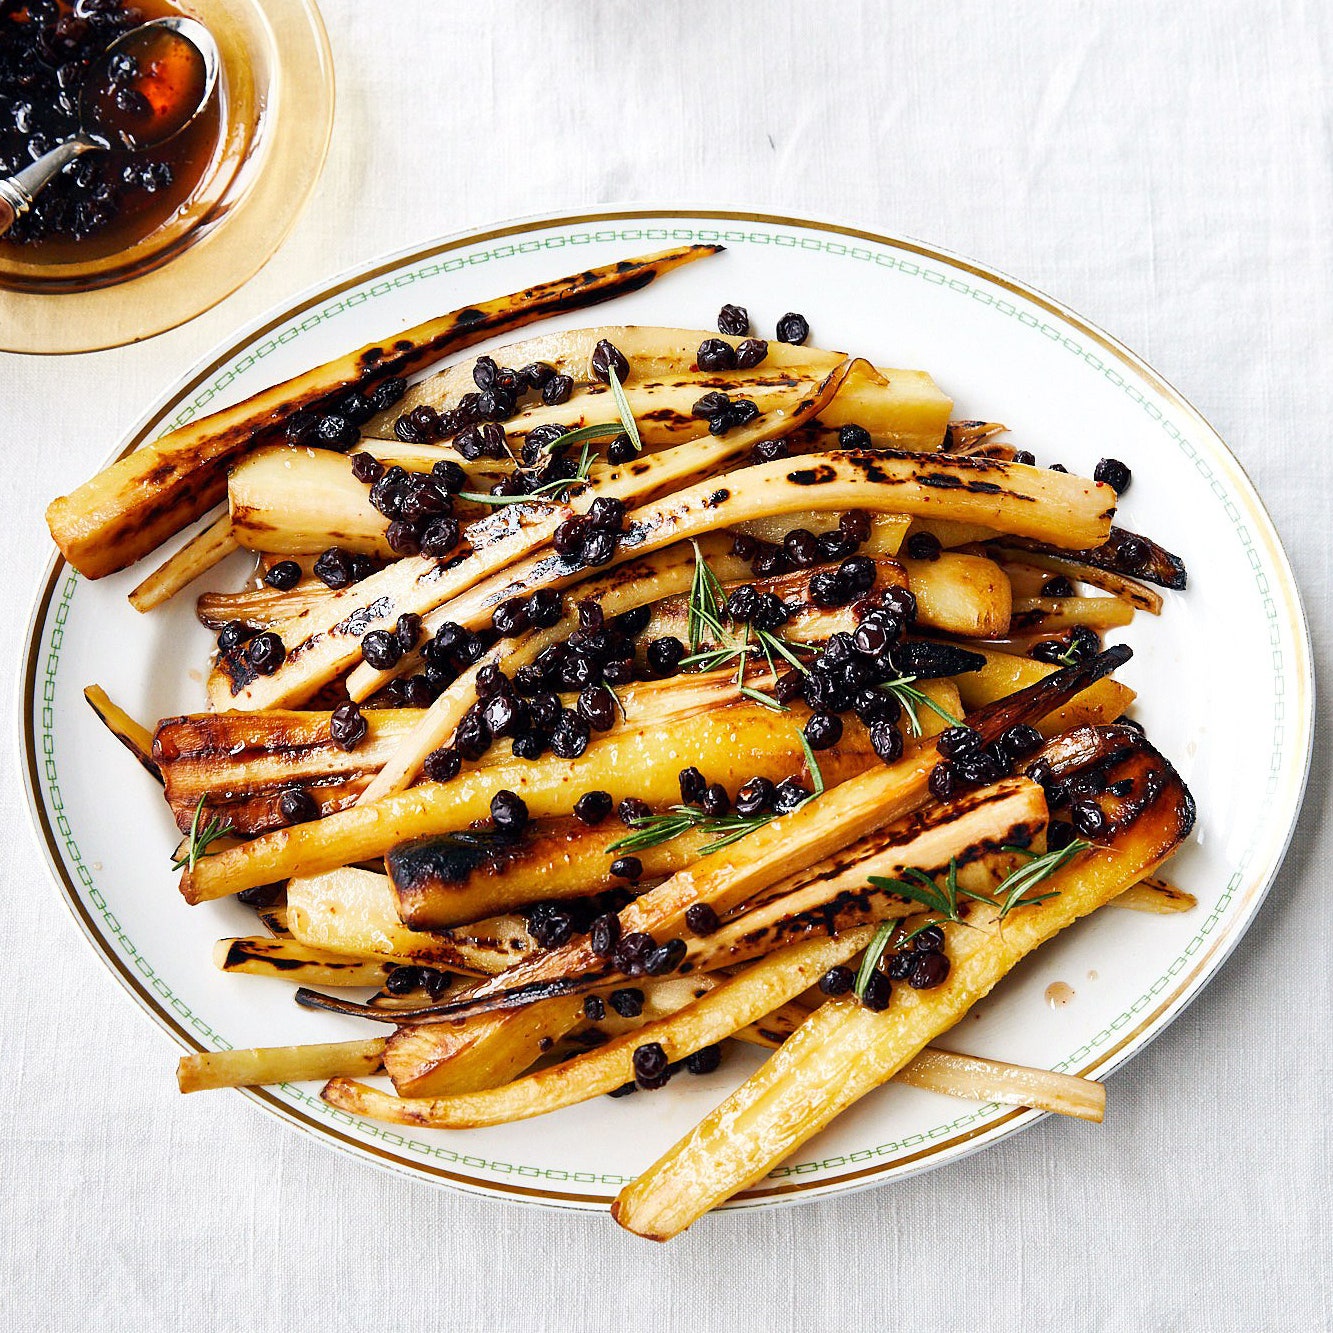 13 Parsnip Recipes for That Sweet Fall Flavor